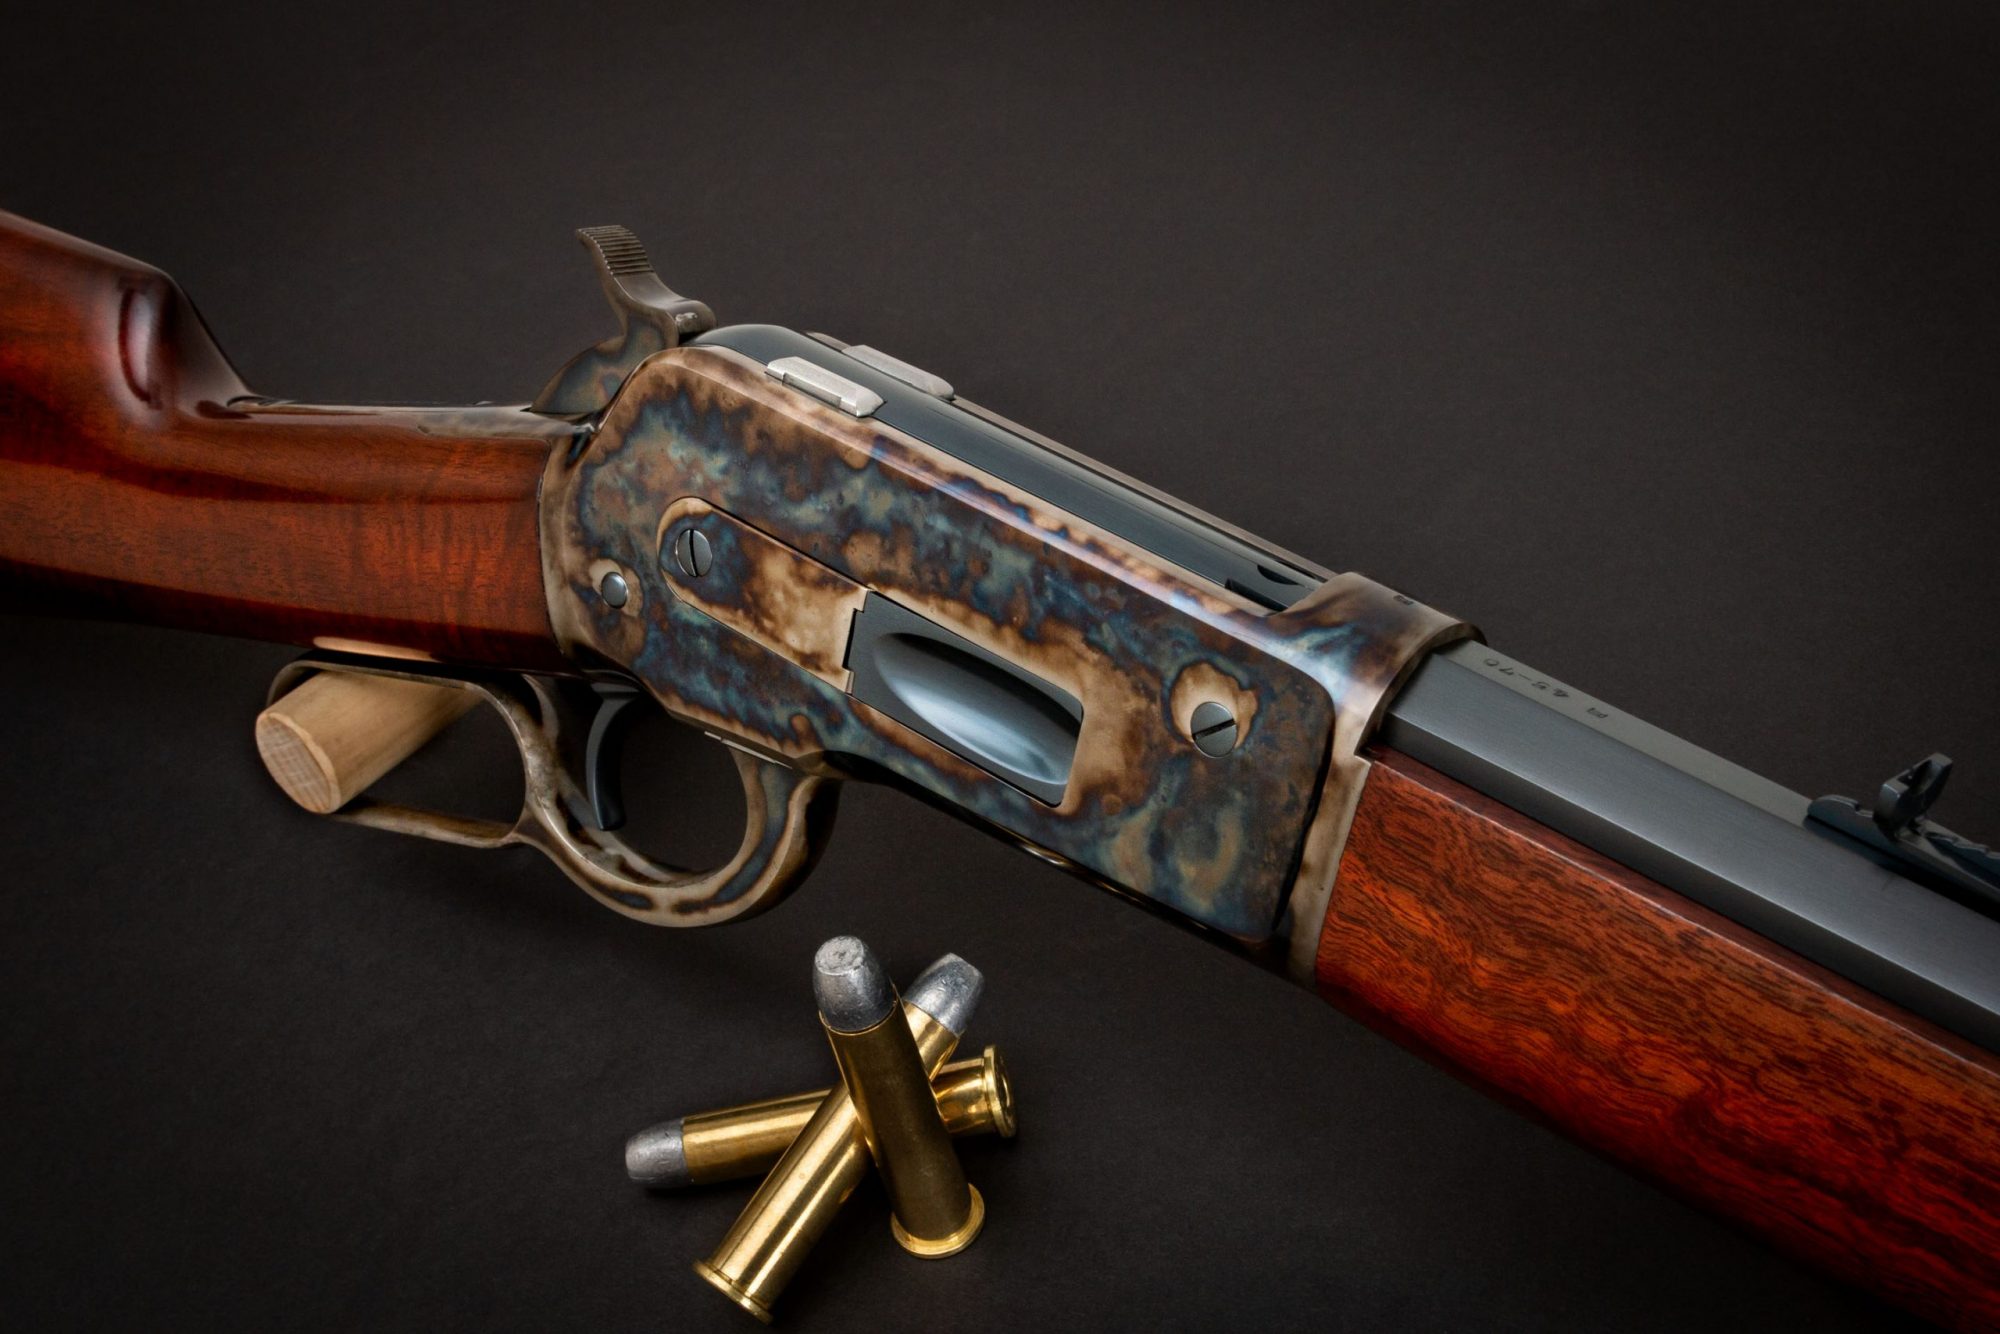 Photo of a Winchester Model 1886 reproduction - The Turnbull Restoration Model 1886 features classic era metal finishes including bone charcoal color case hardening, charcoal bluing and rust bluing